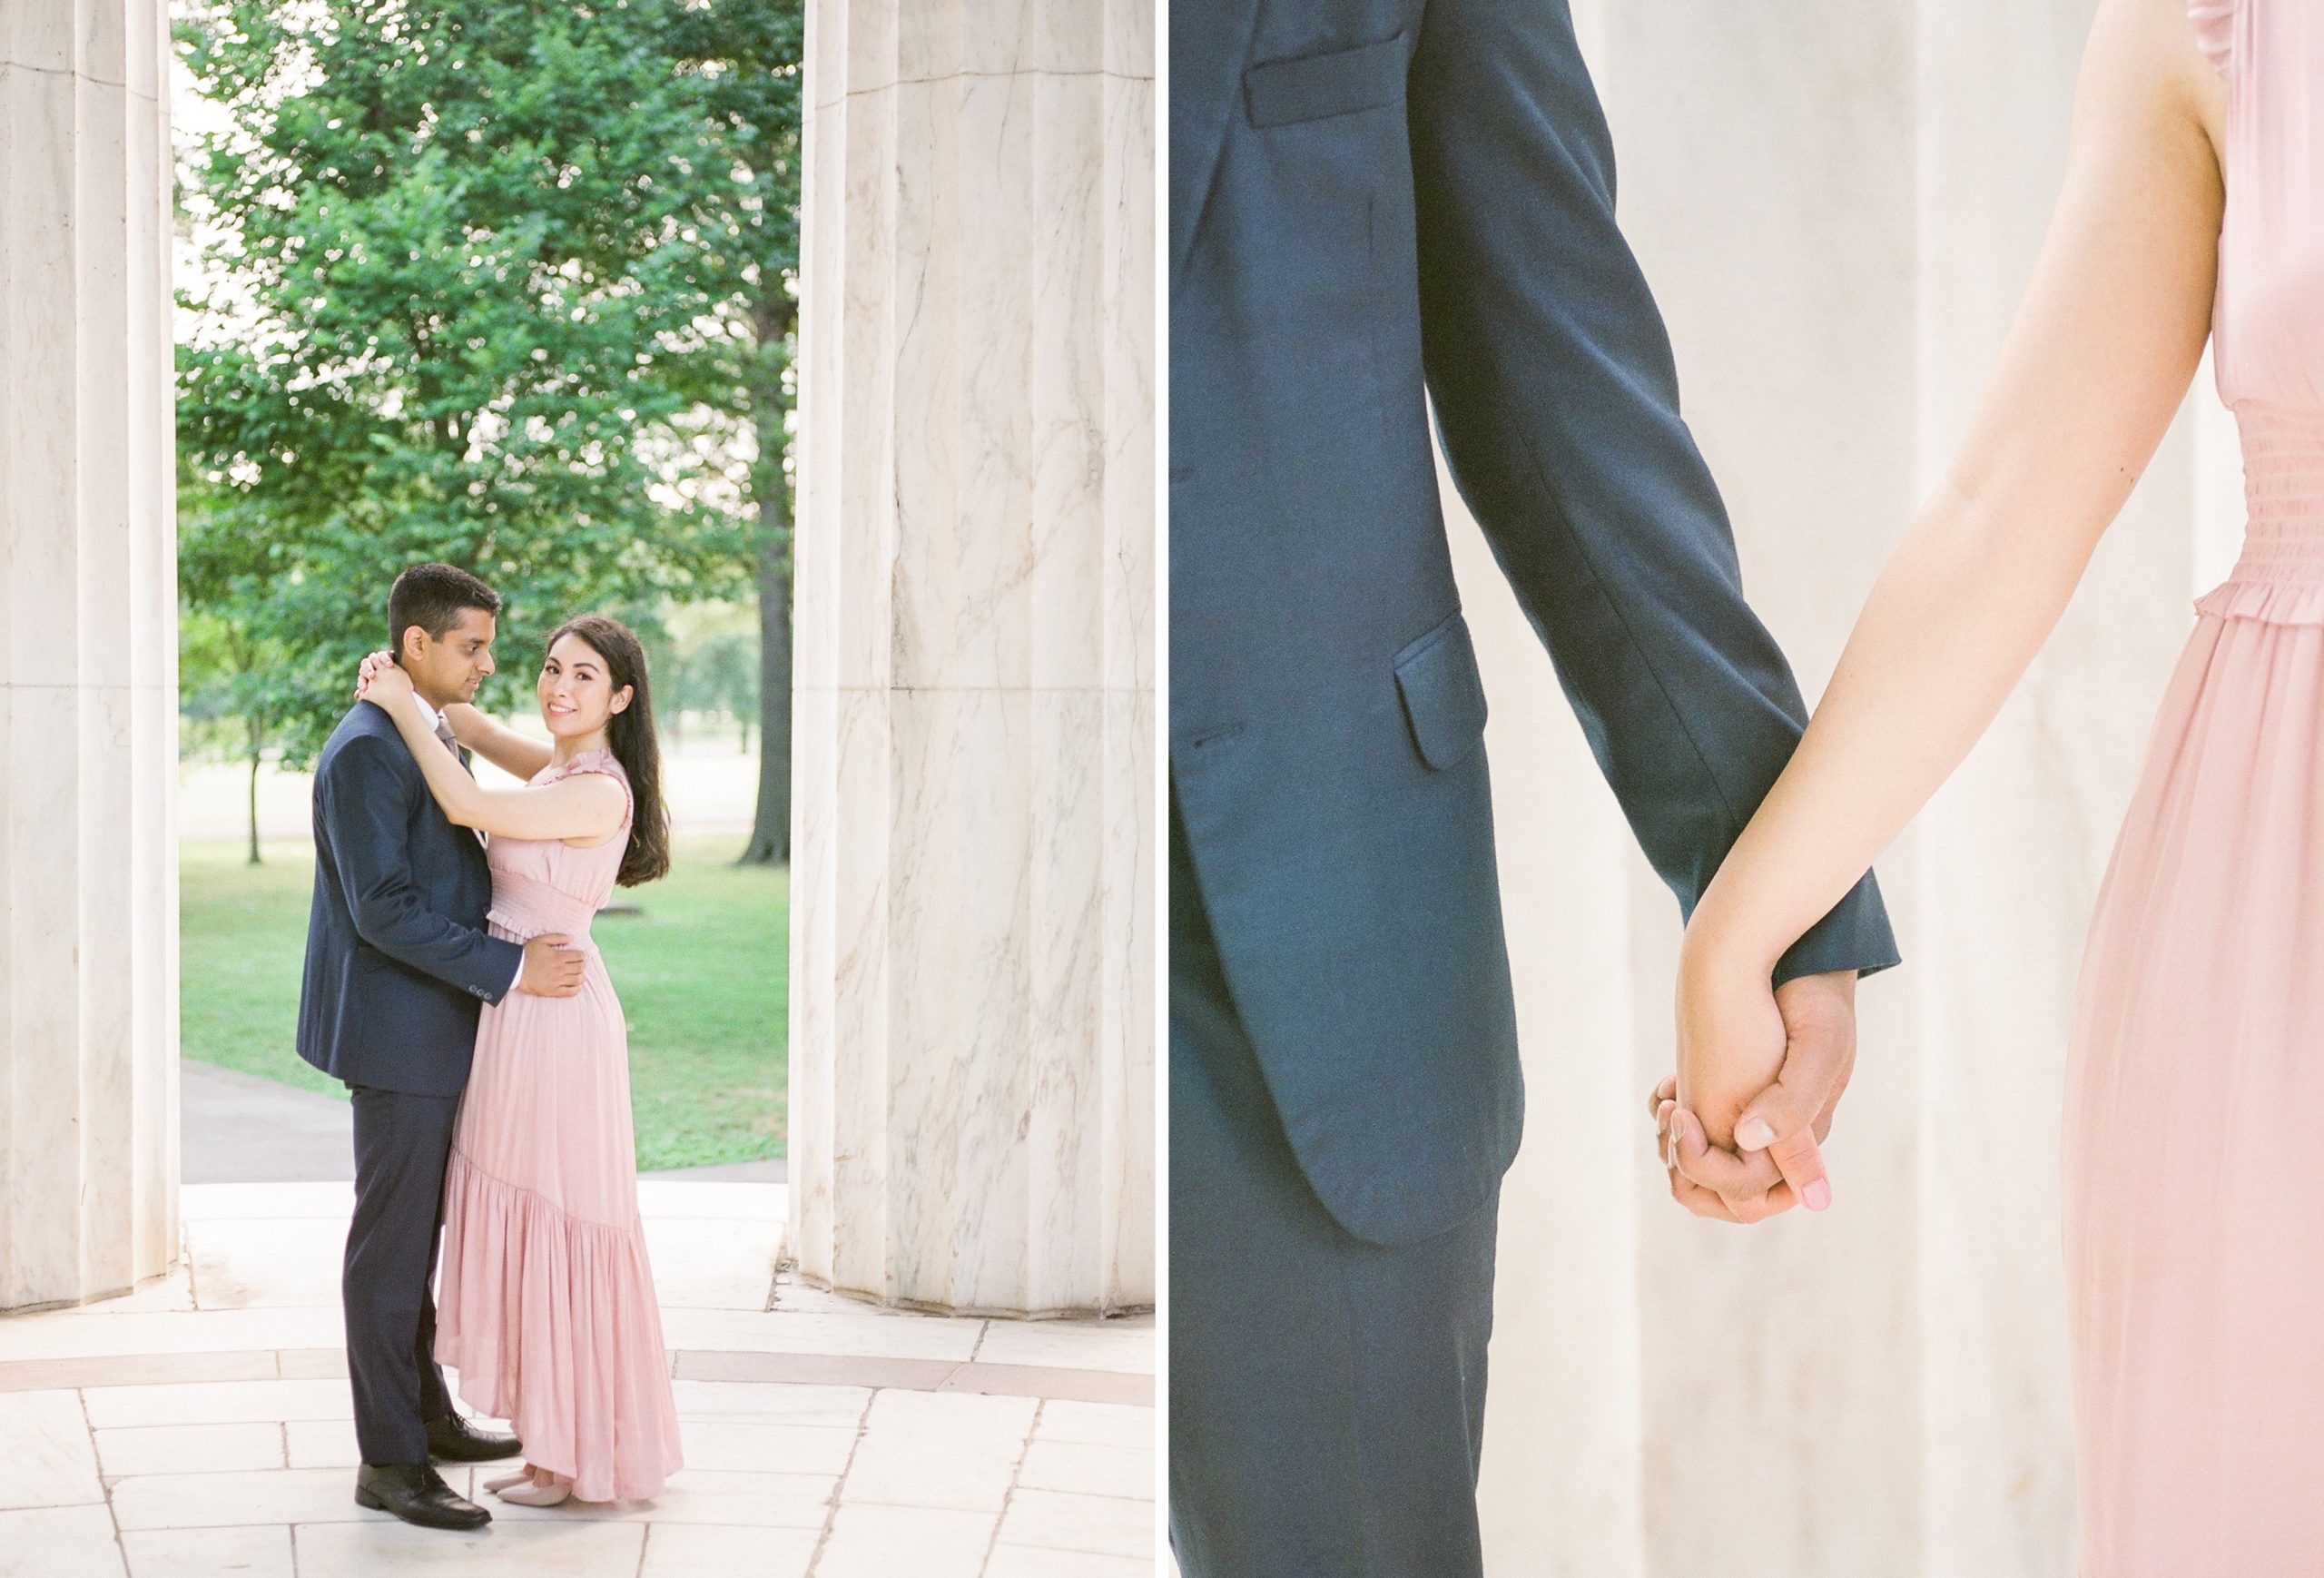 A sunrise engagement session in Washington, DC at the Lincoln Memorial, Reflecting Pool, and DC War Memorial. Captured by film photographer, Alicia Lacey.